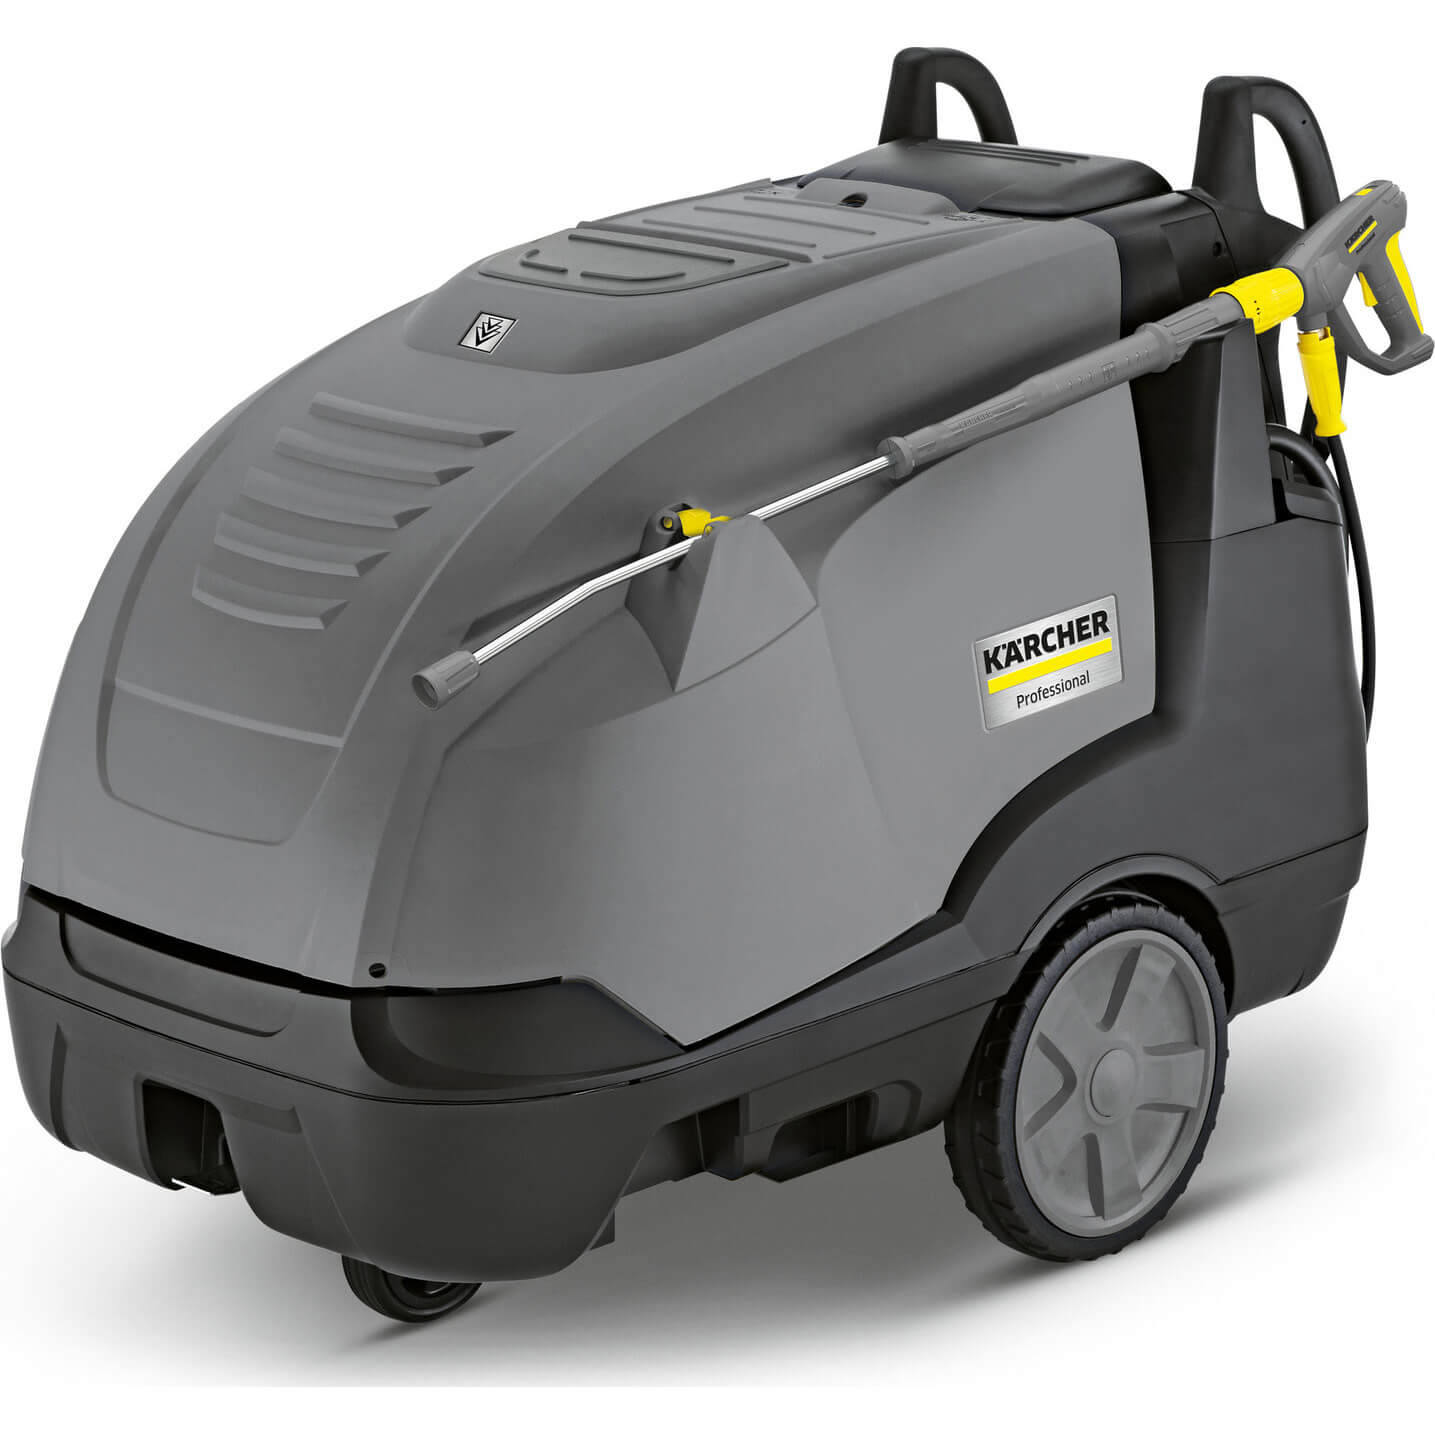 Image of Karcher HDS-E 8/16-4 M 24Kw Professional Hot Water Pressure Washer 160 Bar